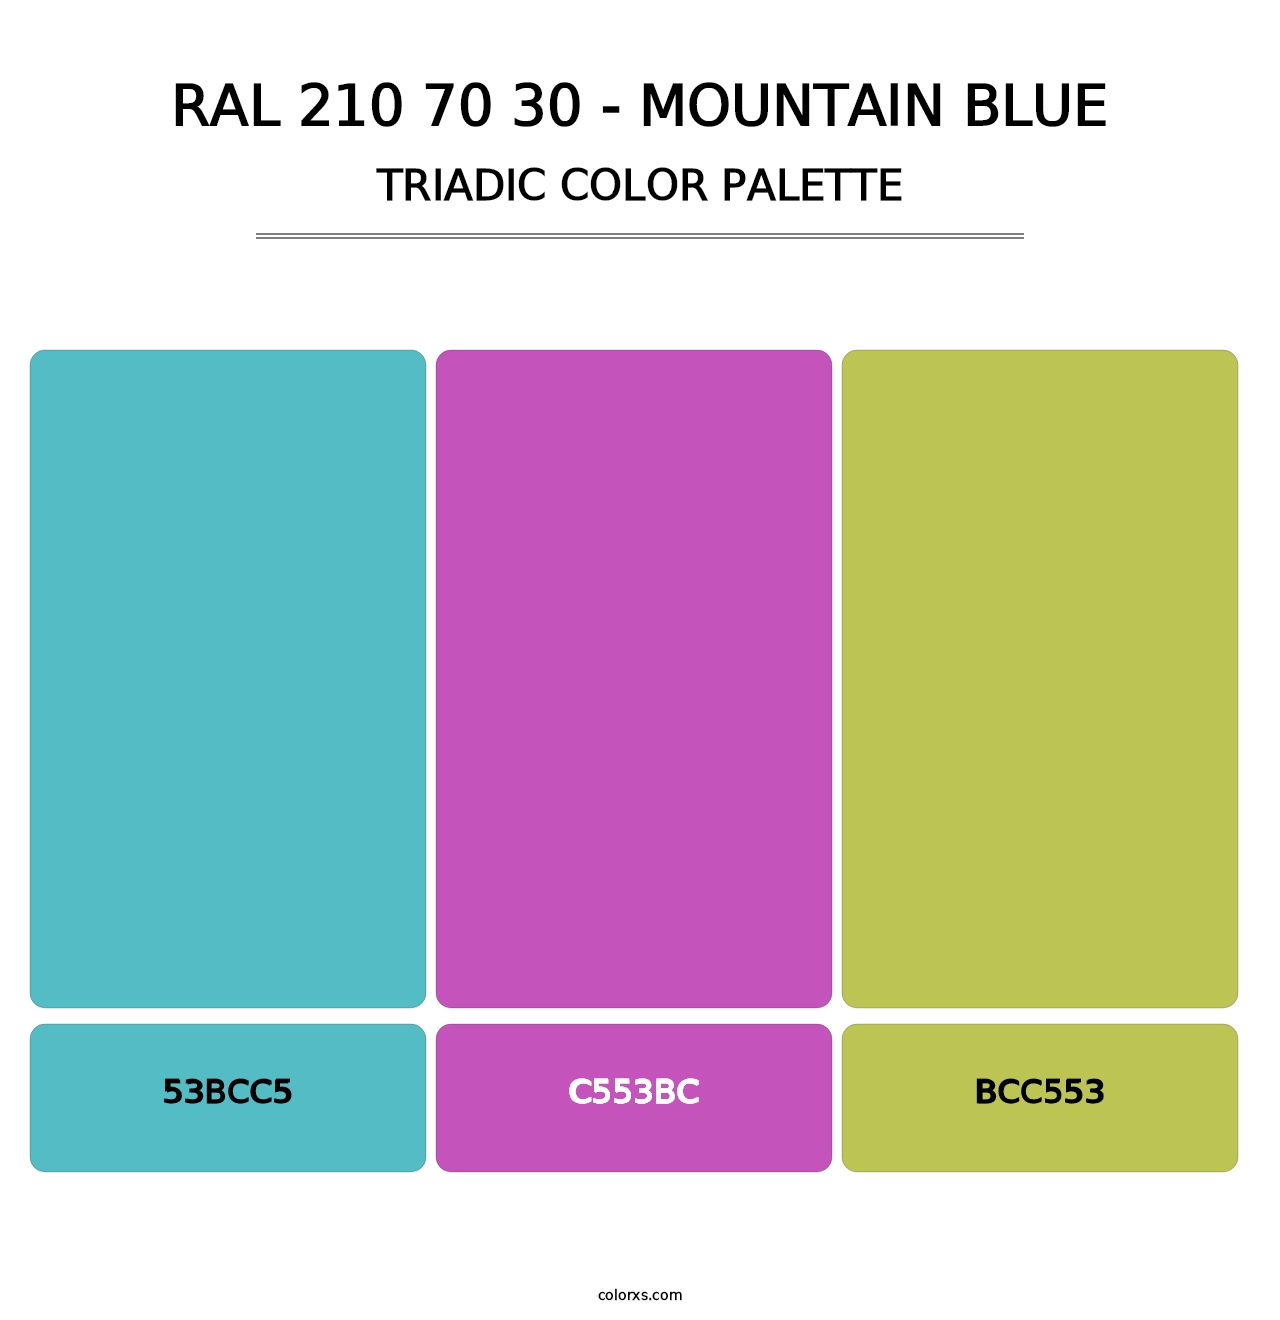 RAL 210 70 30 - Mountain Blue - Triadic Color Palette